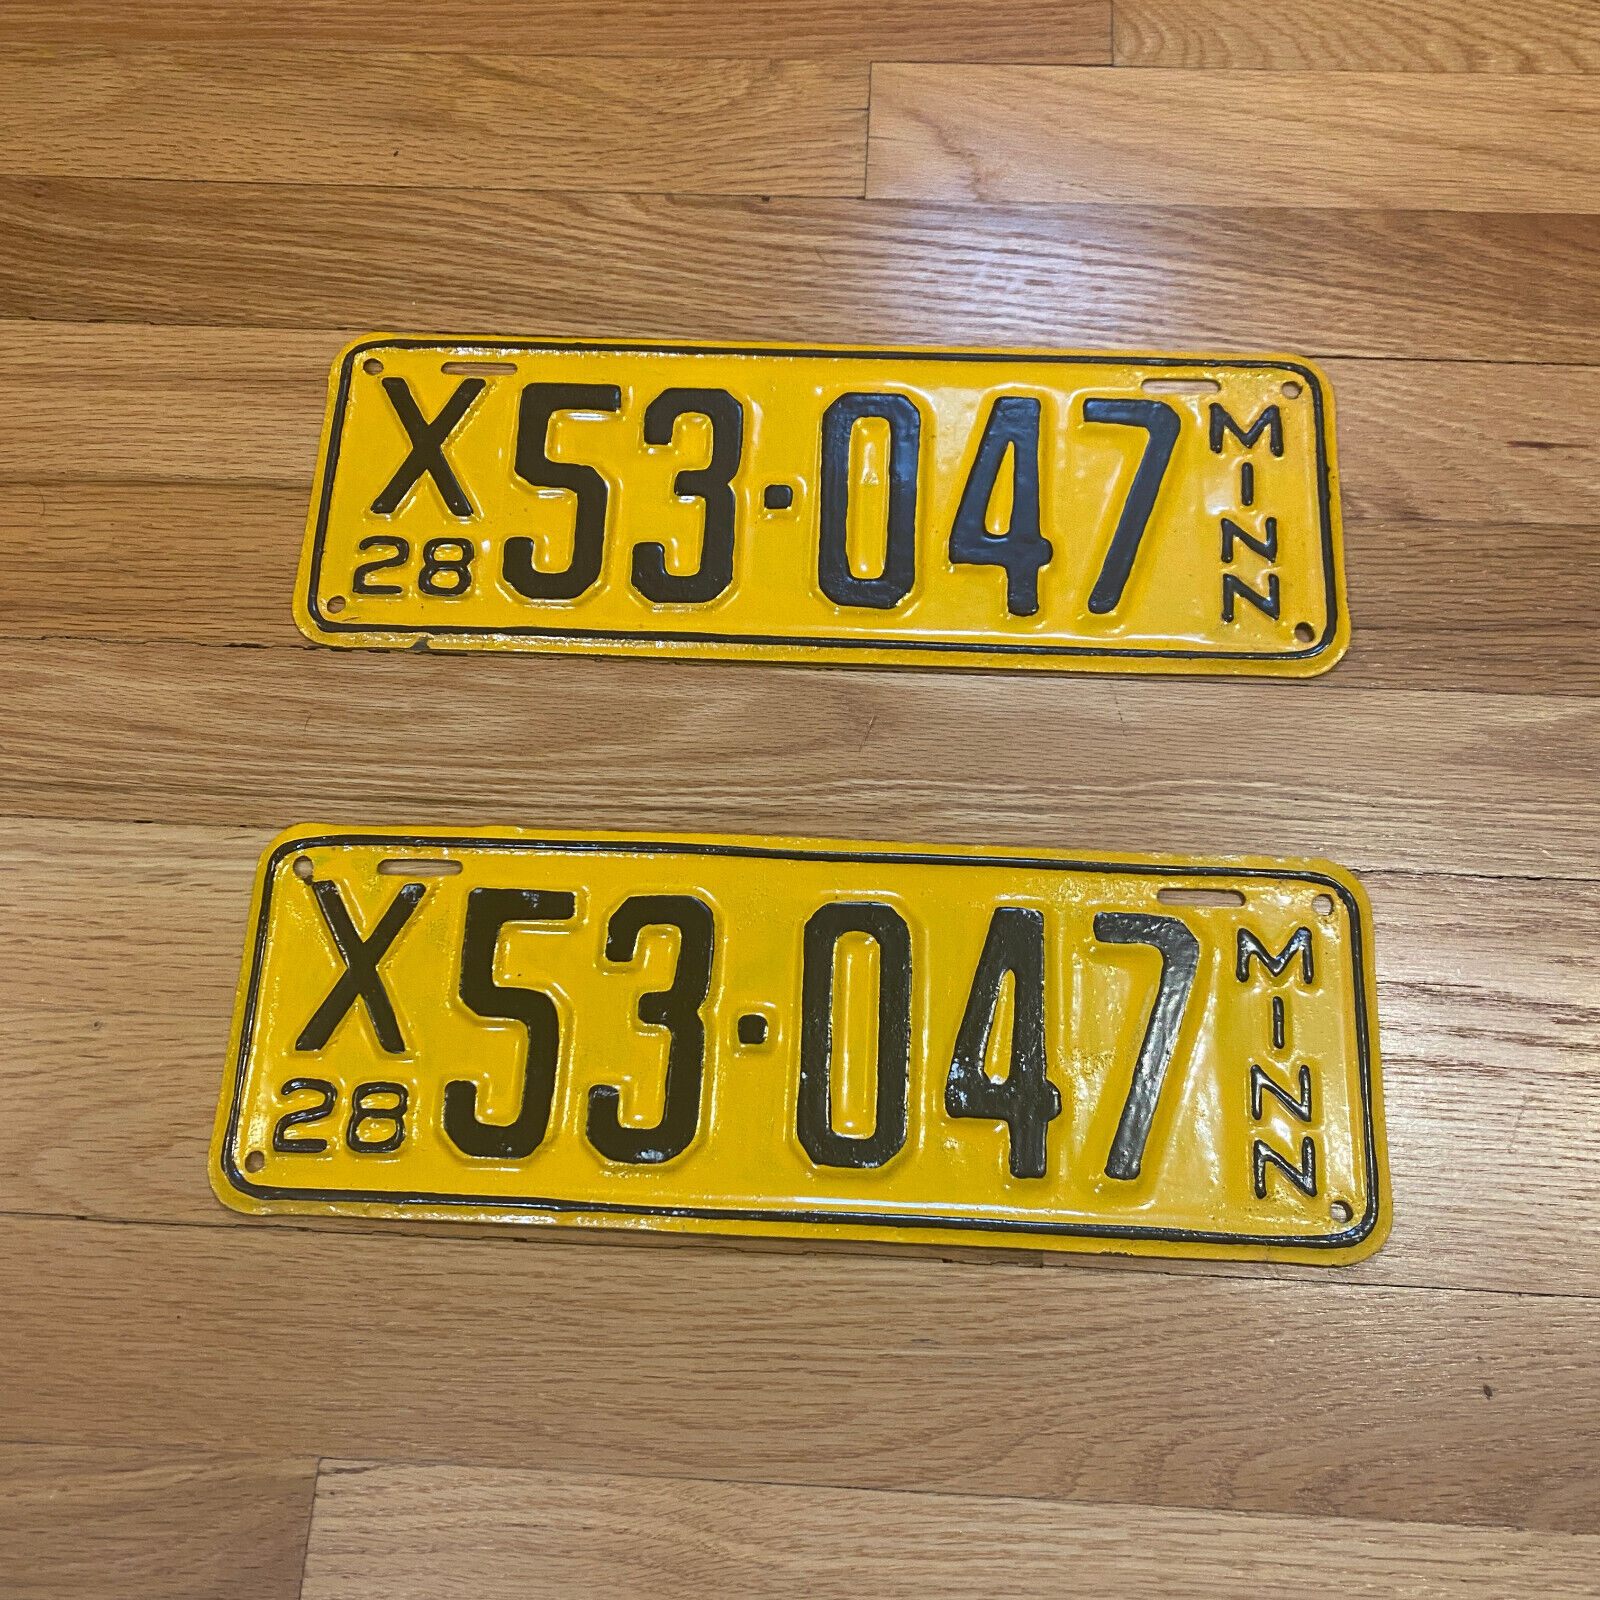 Vtg. 1928 Minnesota License Plates X53-047 Matched Pair May Be Repainted